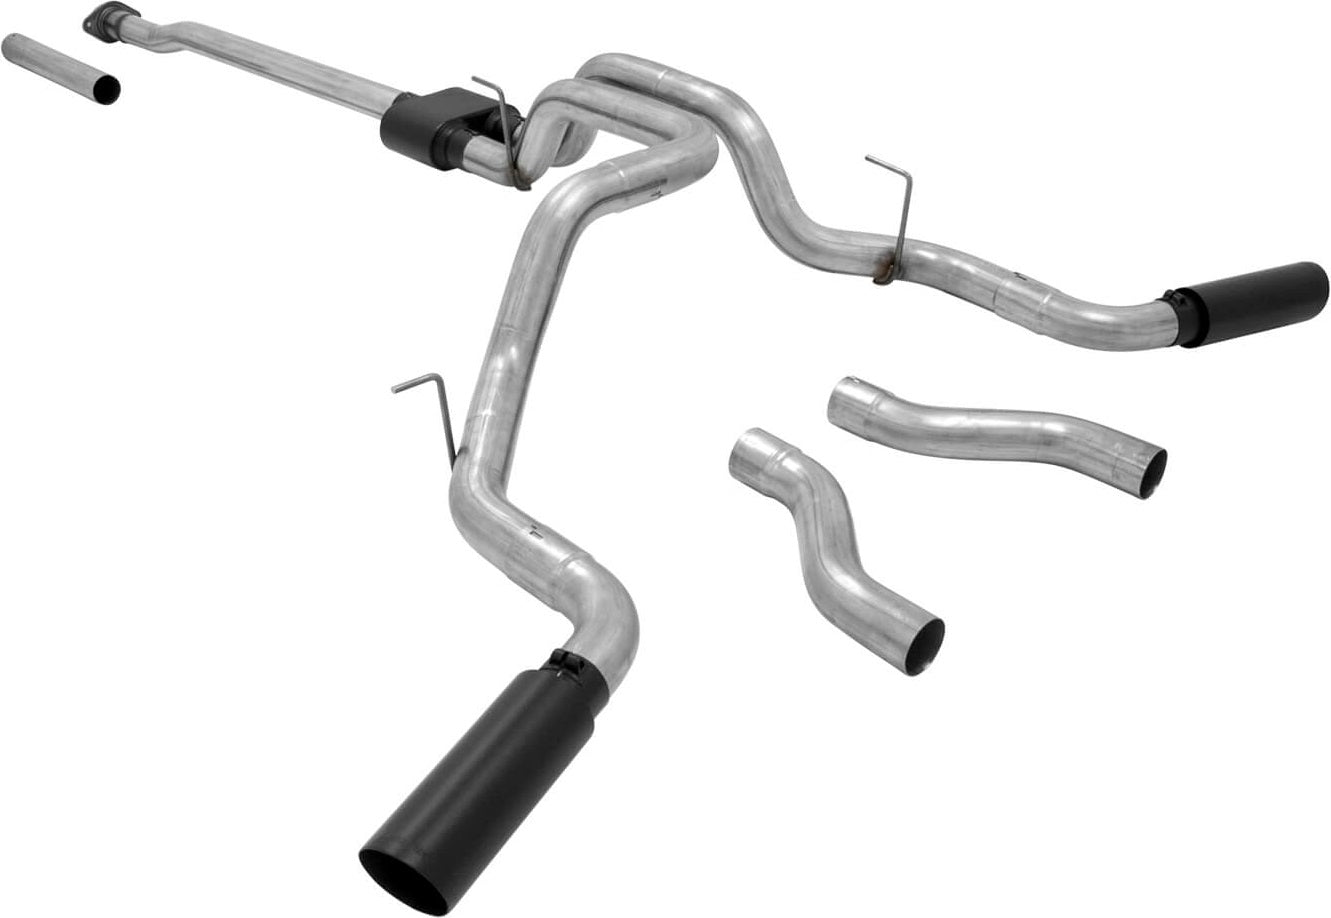 CAT-BACK EXHAUST,OUTLAW,09-14 F150,SS,DOR/S